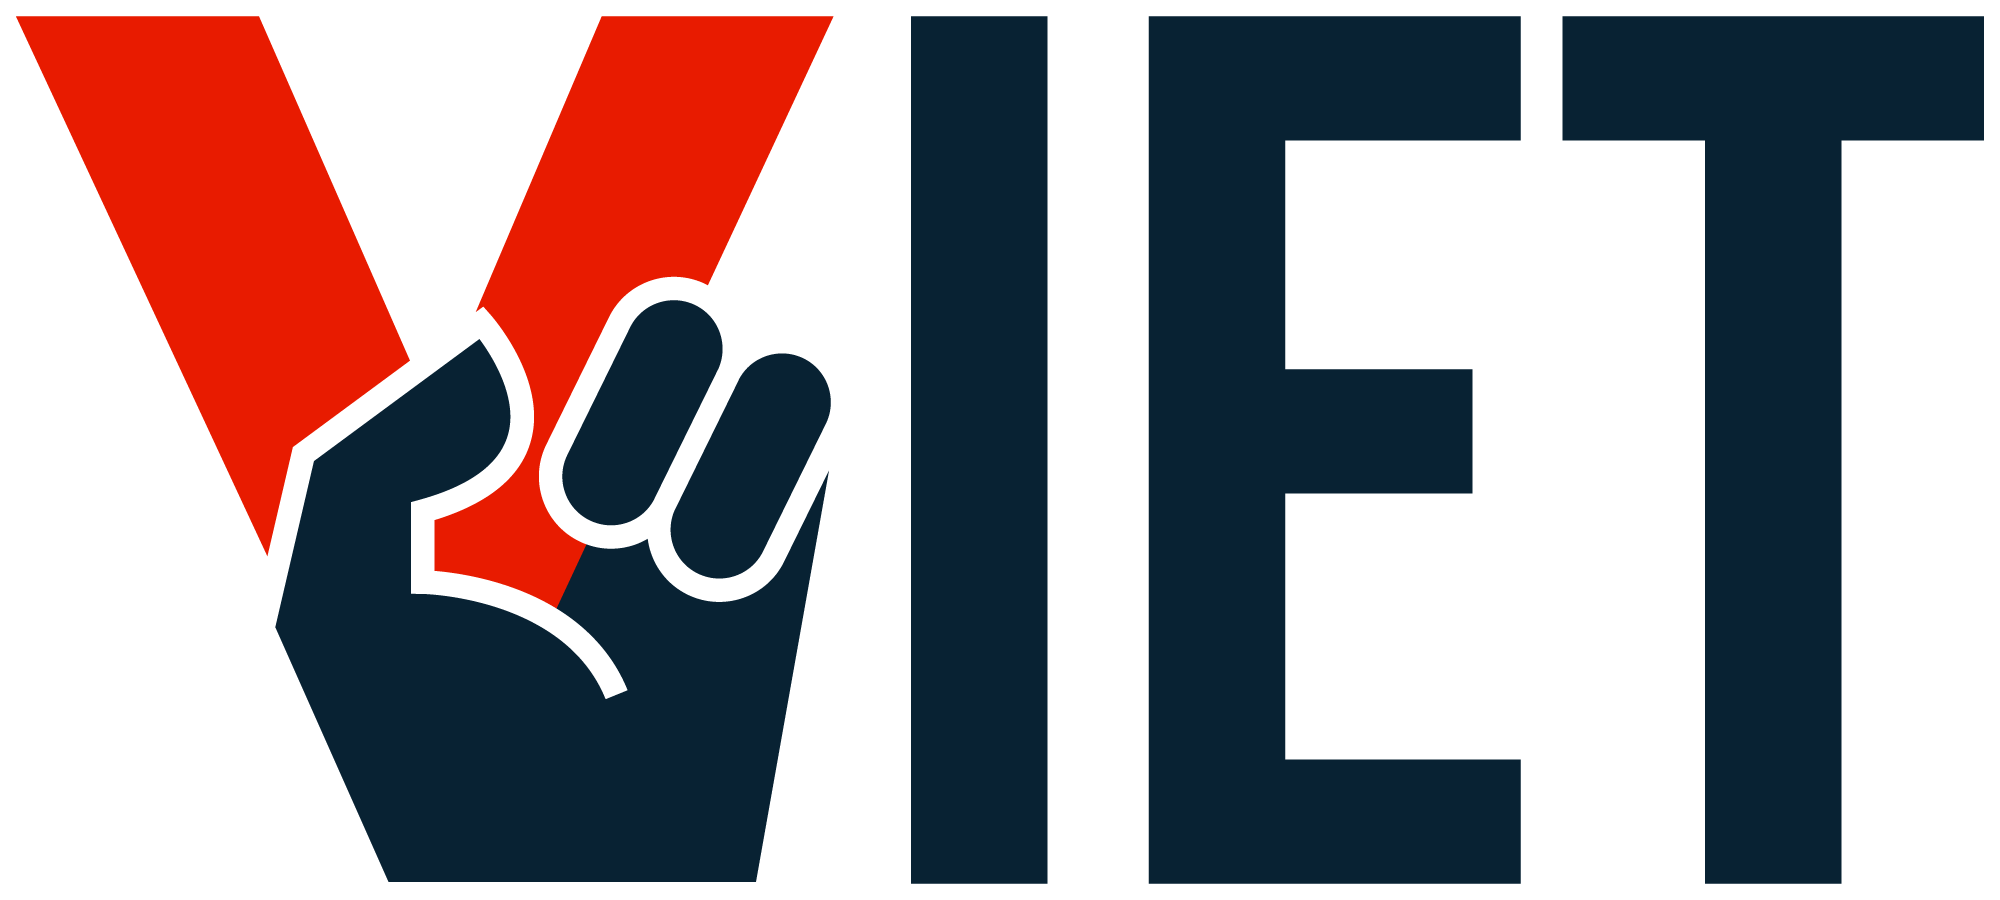 The 'Vote Viet' logo. It spells out his name: V I E T. The V is styled as a hand holding up the peace sign.